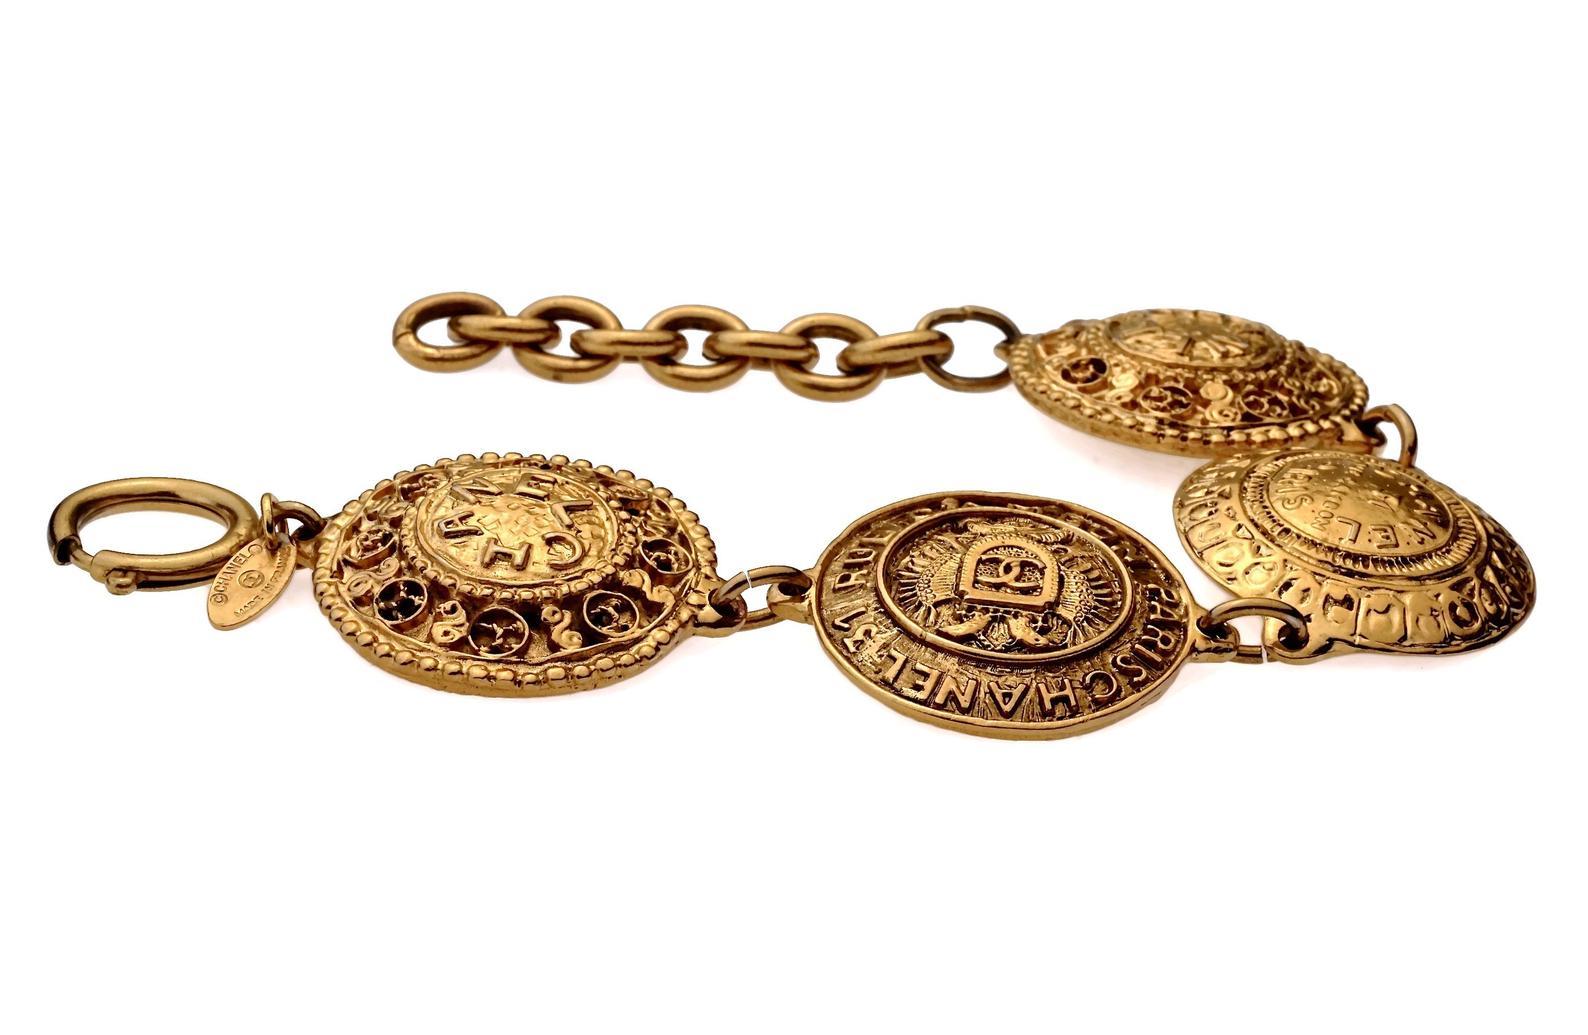 Vintage CHANEL Logo Medallion Bracelet

Measurements:
Medallions: 1.33 inches (3.4 cm)
Wearable Length: 9.64 inches (24.5 cm)

Features:
- 100% Authentic CHANEL.
- 4 Iconic Chanel emblem medallions.
- Adjustable spring lobster closure.
- Signed